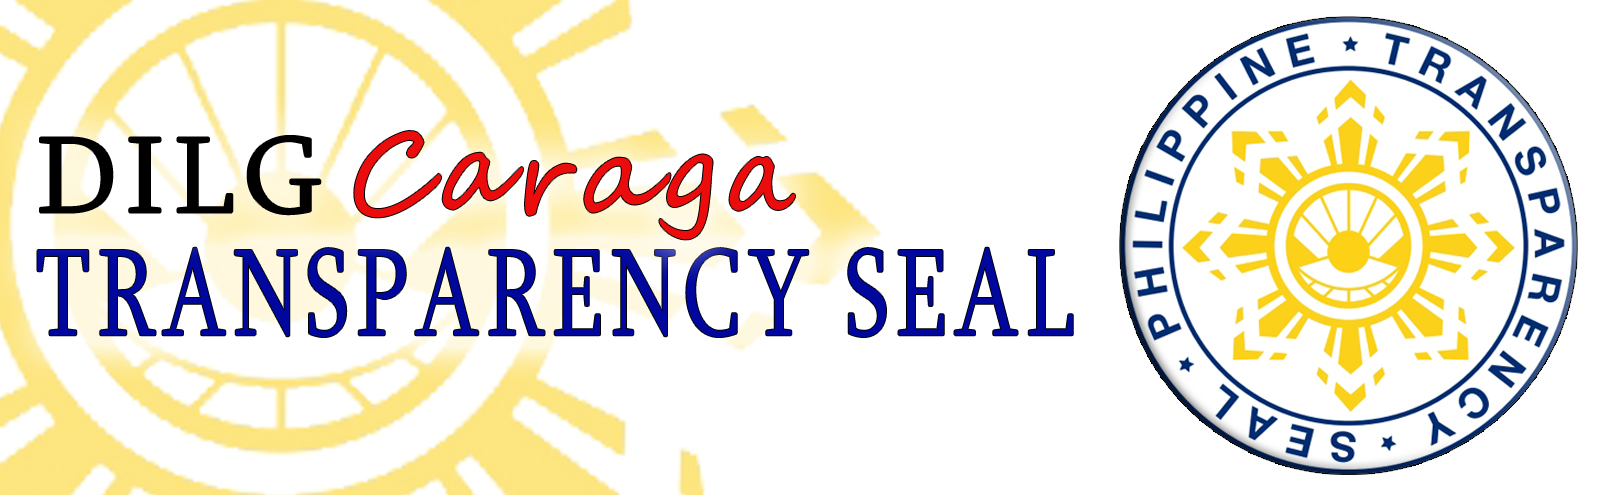 transparency Seal